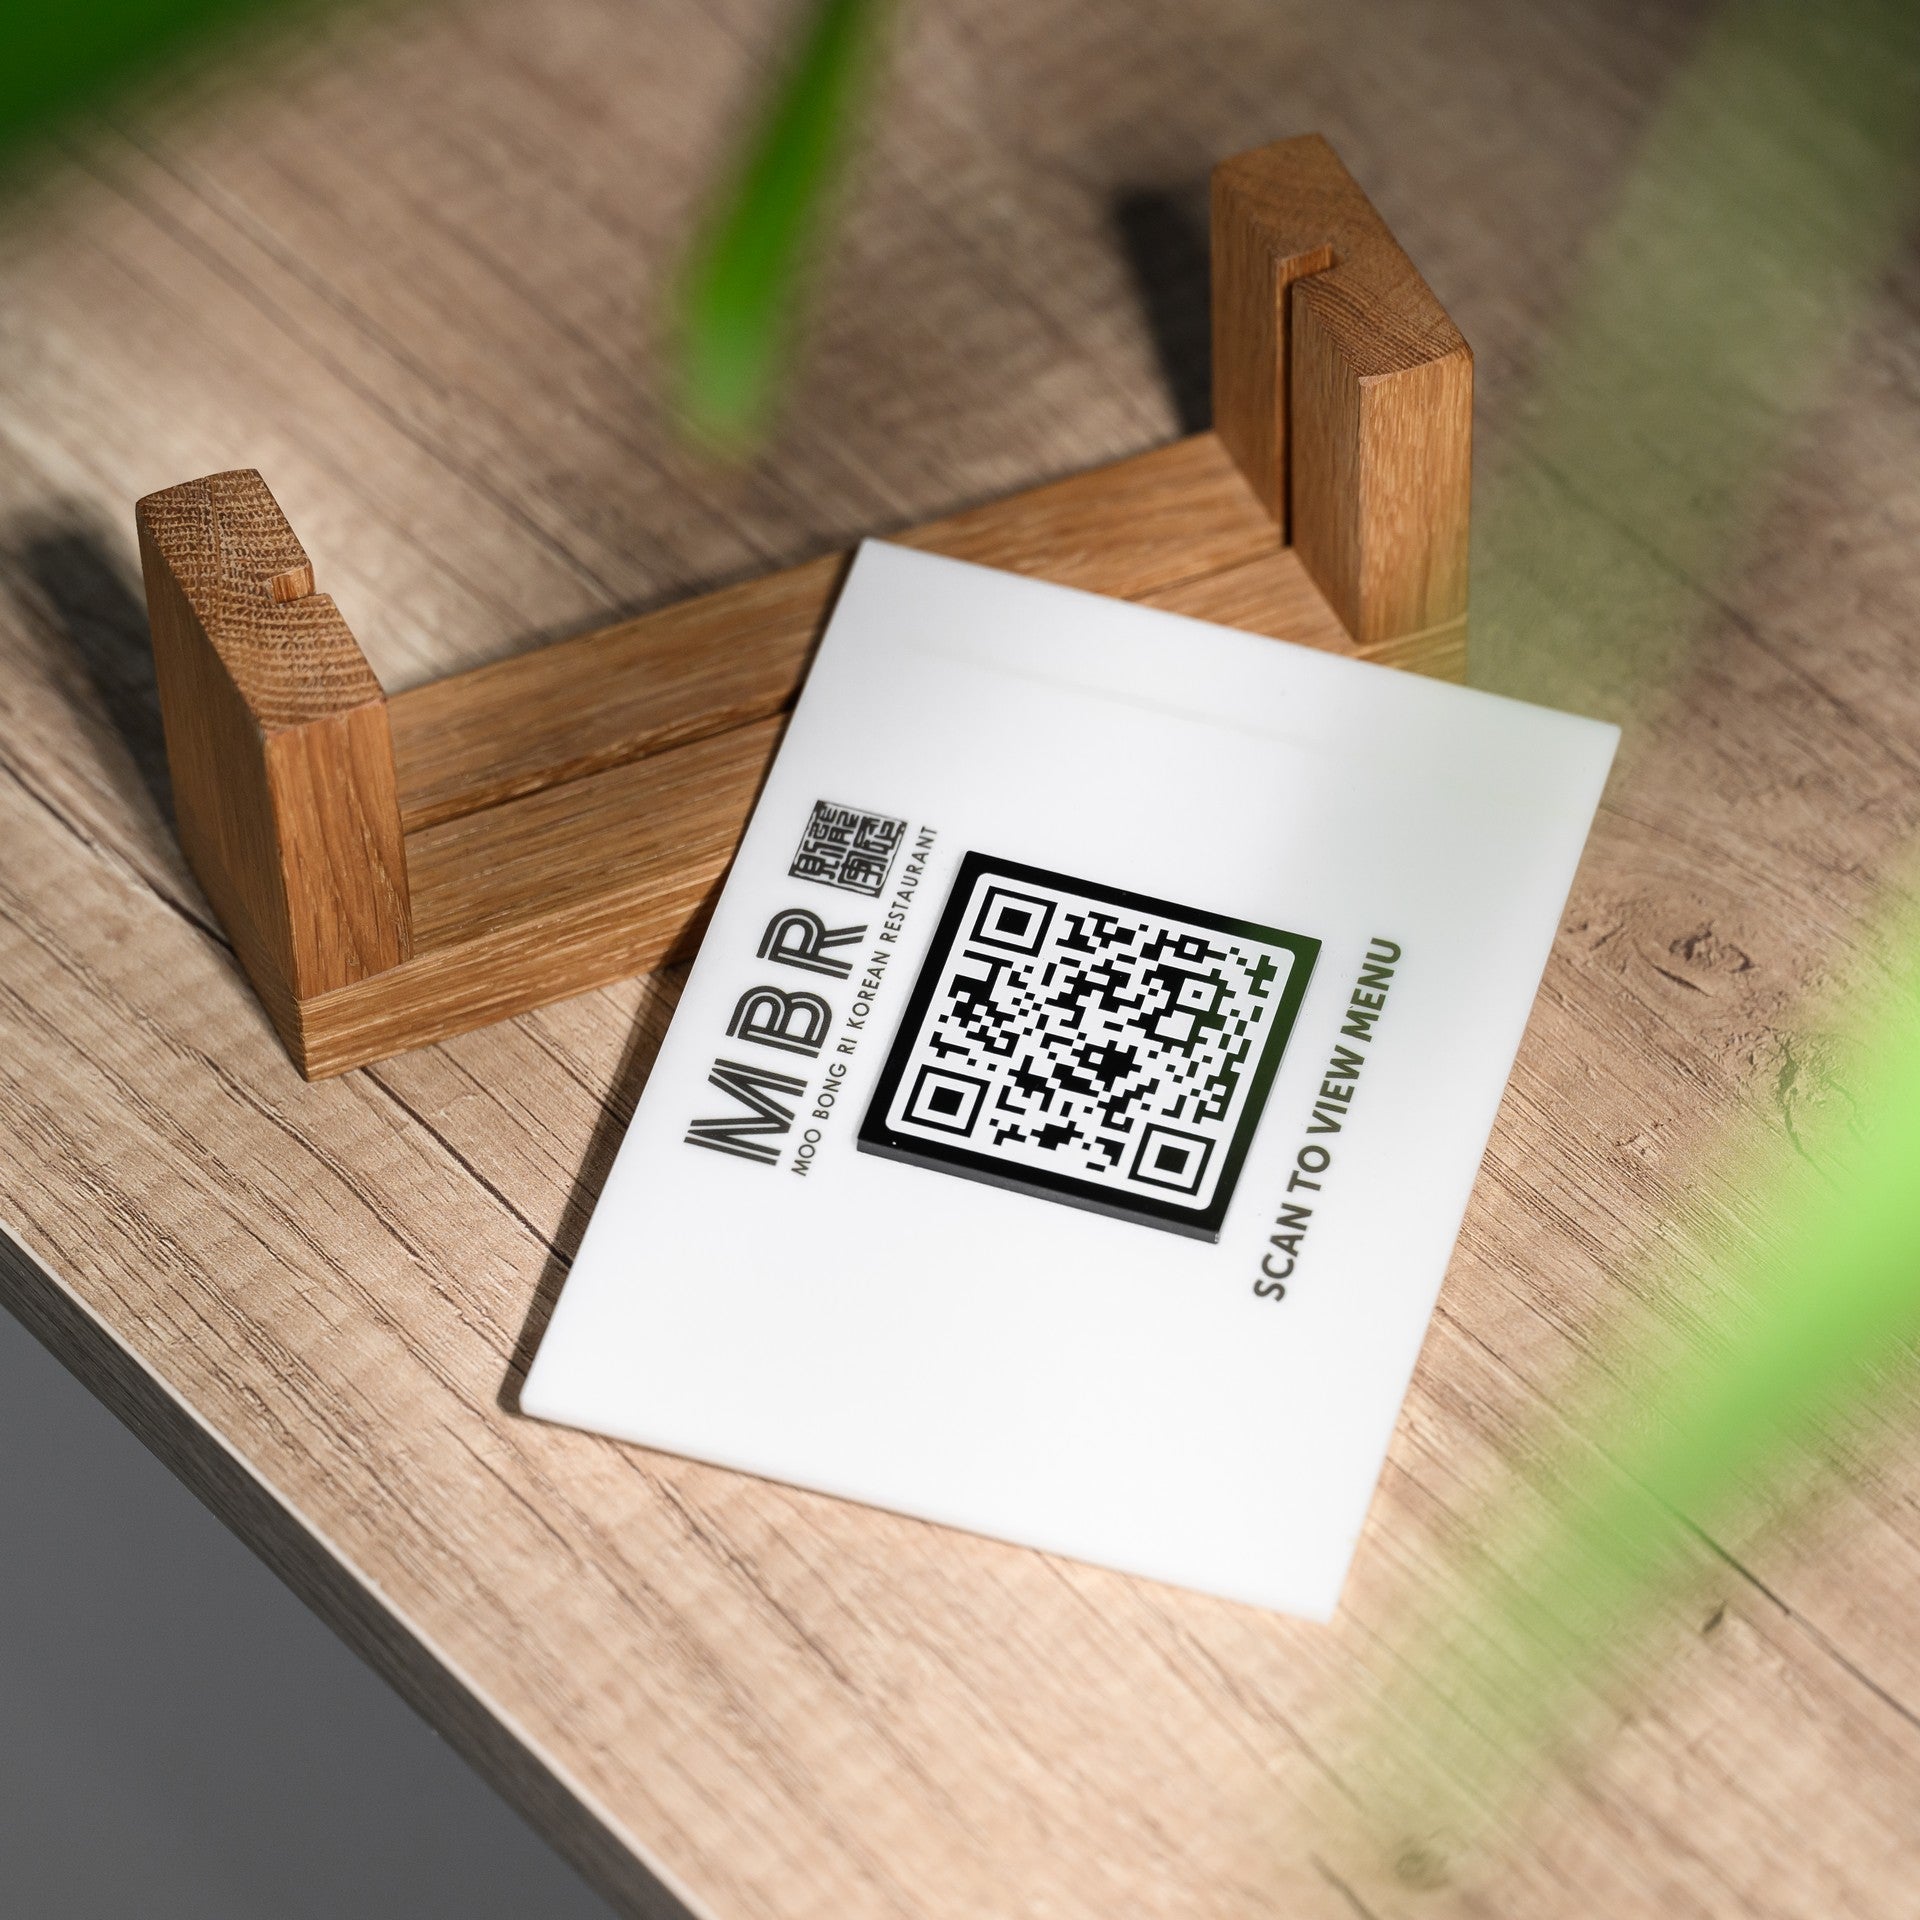 Acrylic QR Menu Display with Wooden Stand